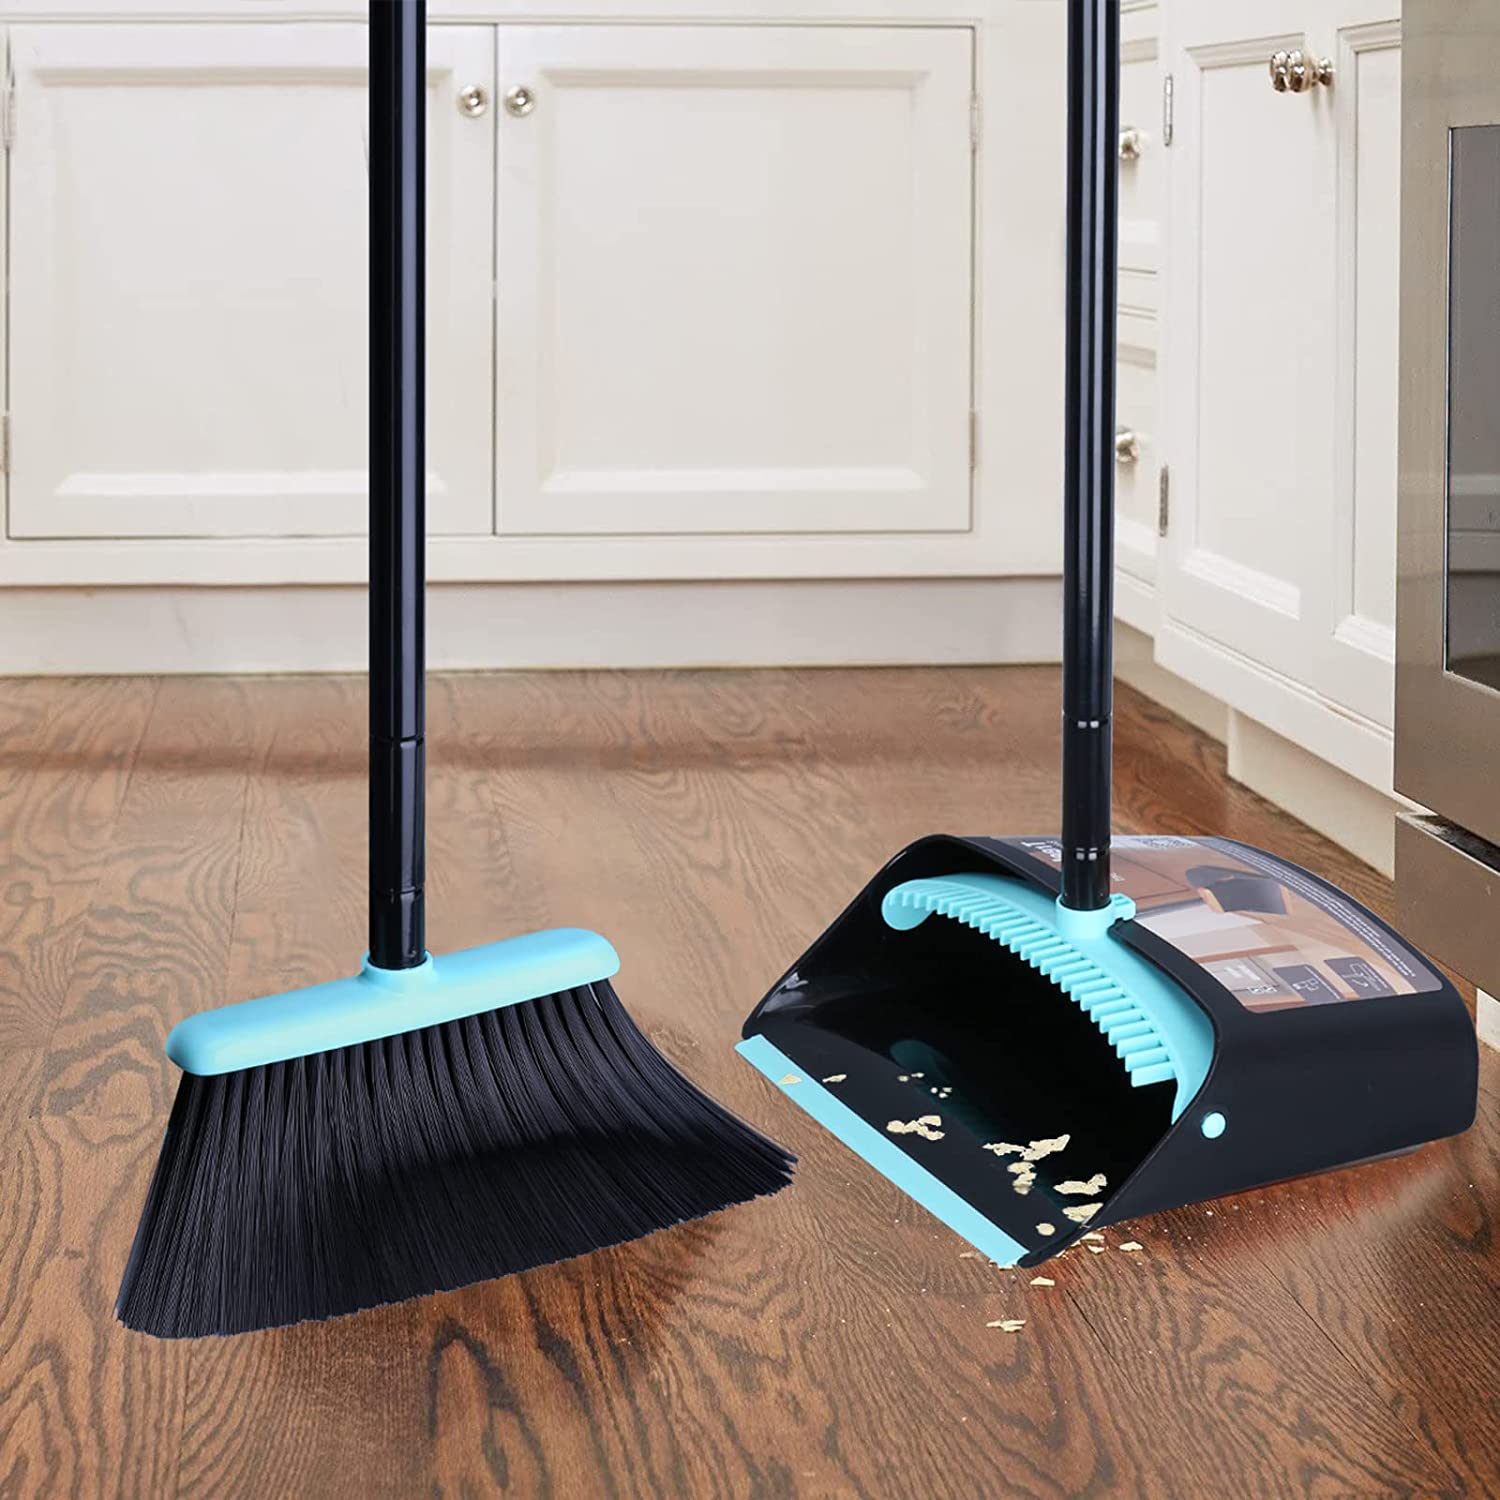 Dustpan and Broom for Home, Cleaning Tools, Dust pan with Broom with Long Handle